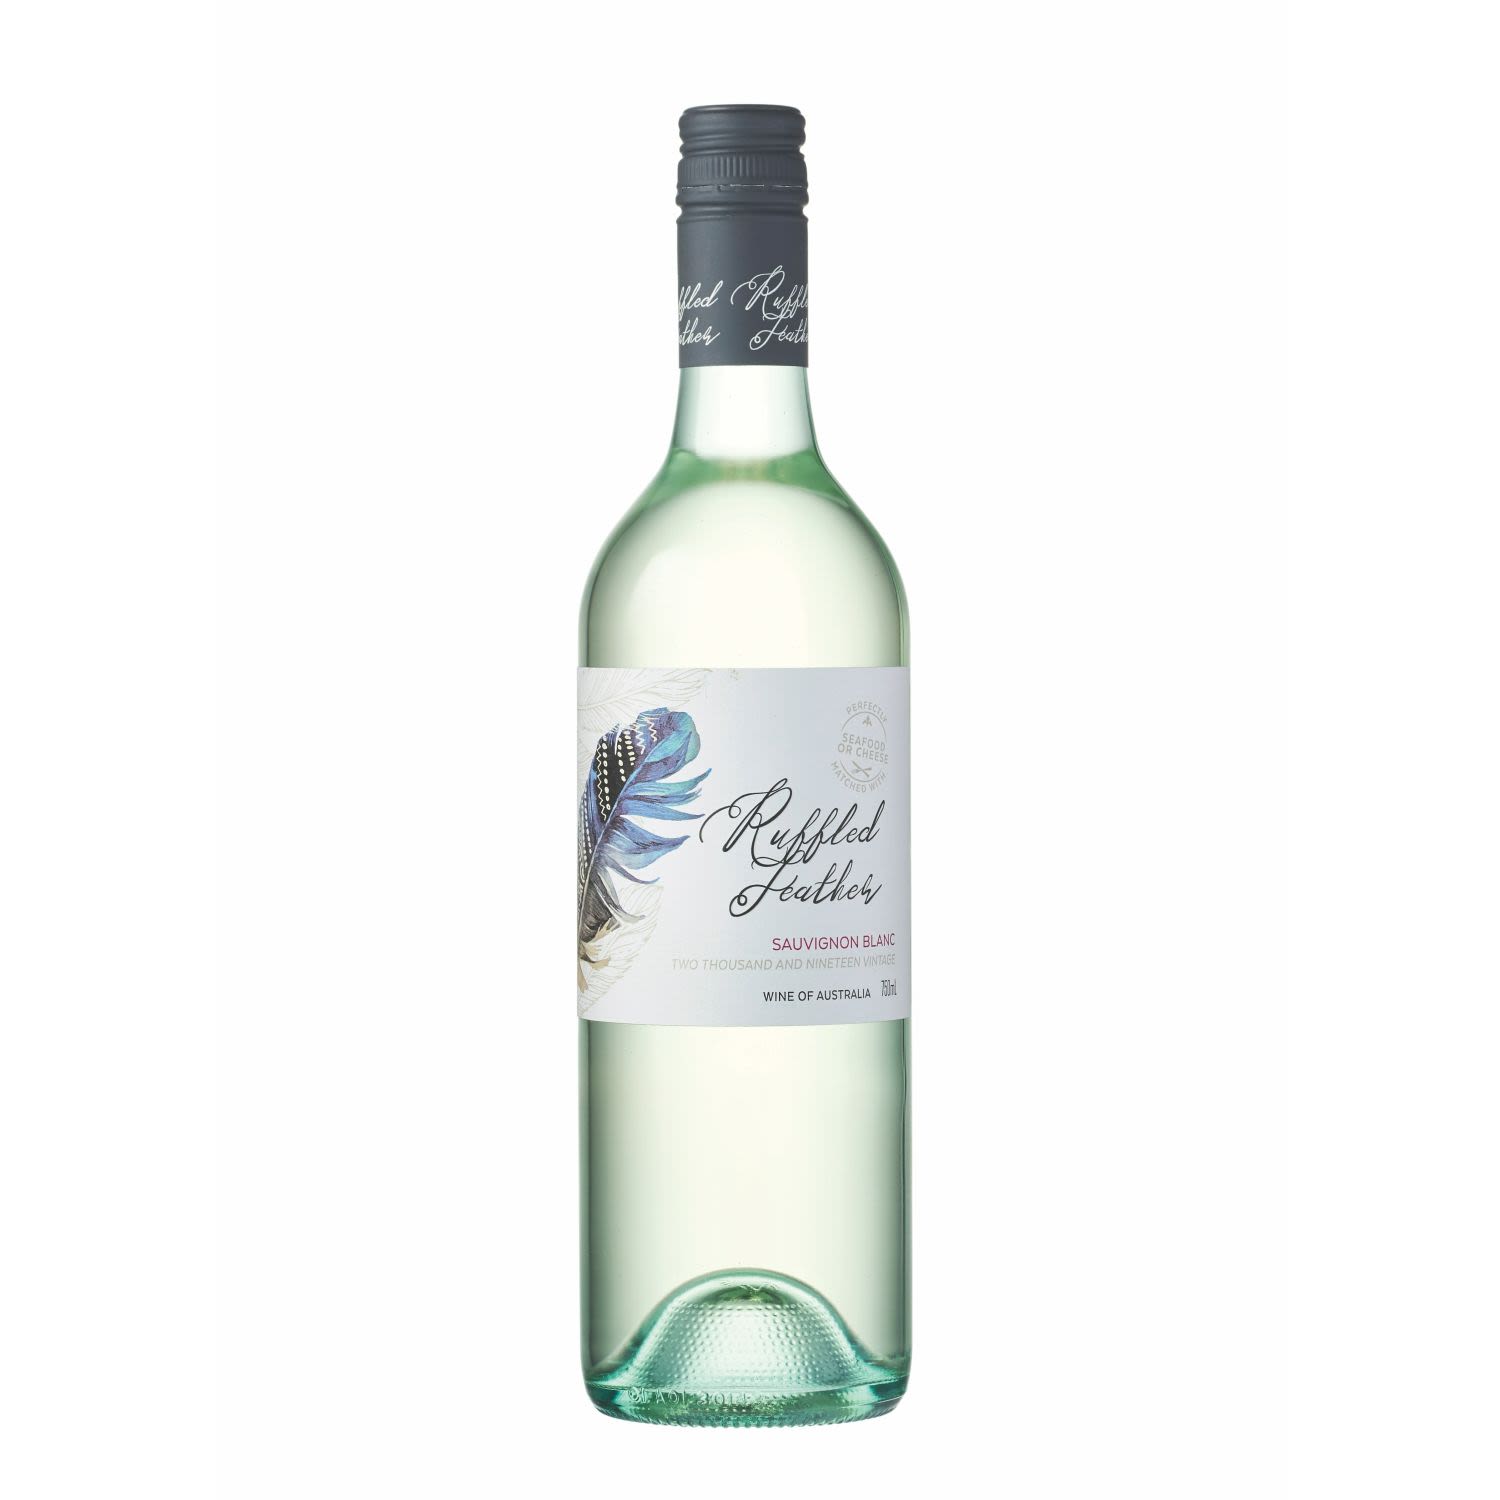 The Ruffled Feather Sauvignon Blanc excites the palate, it’s vibrant, with big juicy flavours. It highlights the diversity of Australian winemakers who produce an array of premium quality wines that rival the world’s best. Enjoy with garlic prawns, spicy Asian cuisine and cheese platters.<br /> <br />Alcohol Volume: 12.00%<br /><br />Pack Format: Bottle<br /><br />Standard Drinks: 7.1</br /><br />Pack Type: Bottle<br /><br />Country of Origin: Australia<br /><br />Region: South Eastern Australia<br /><br />Vintage: Vintages Vary<br />